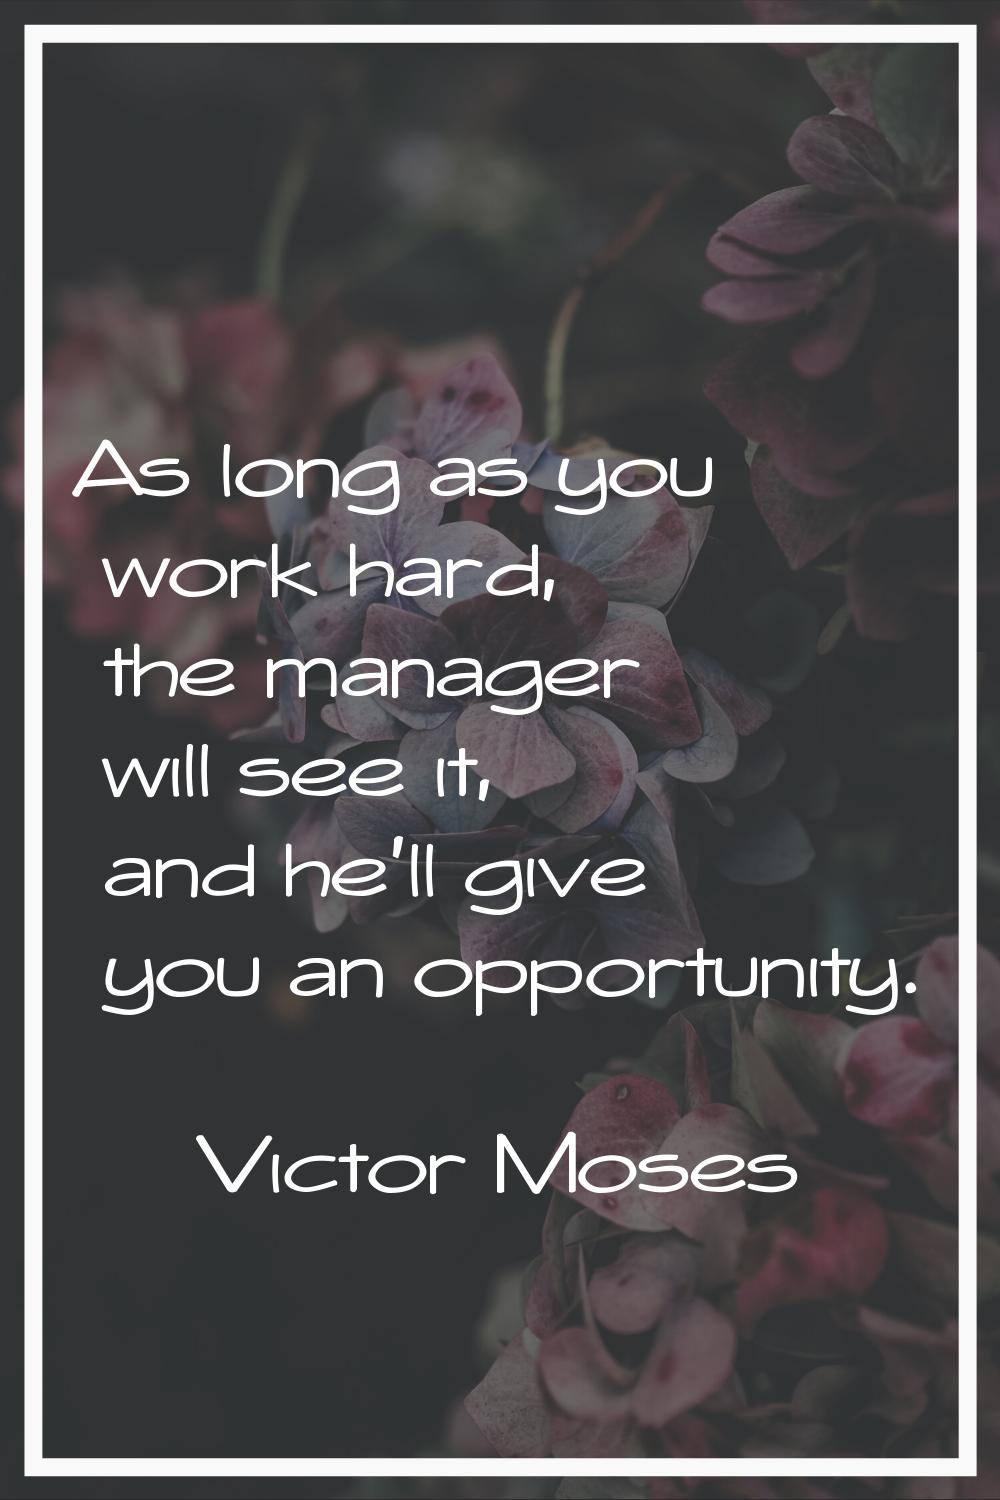 As long as you work hard, the manager will see it, and he'll give you an opportunity.